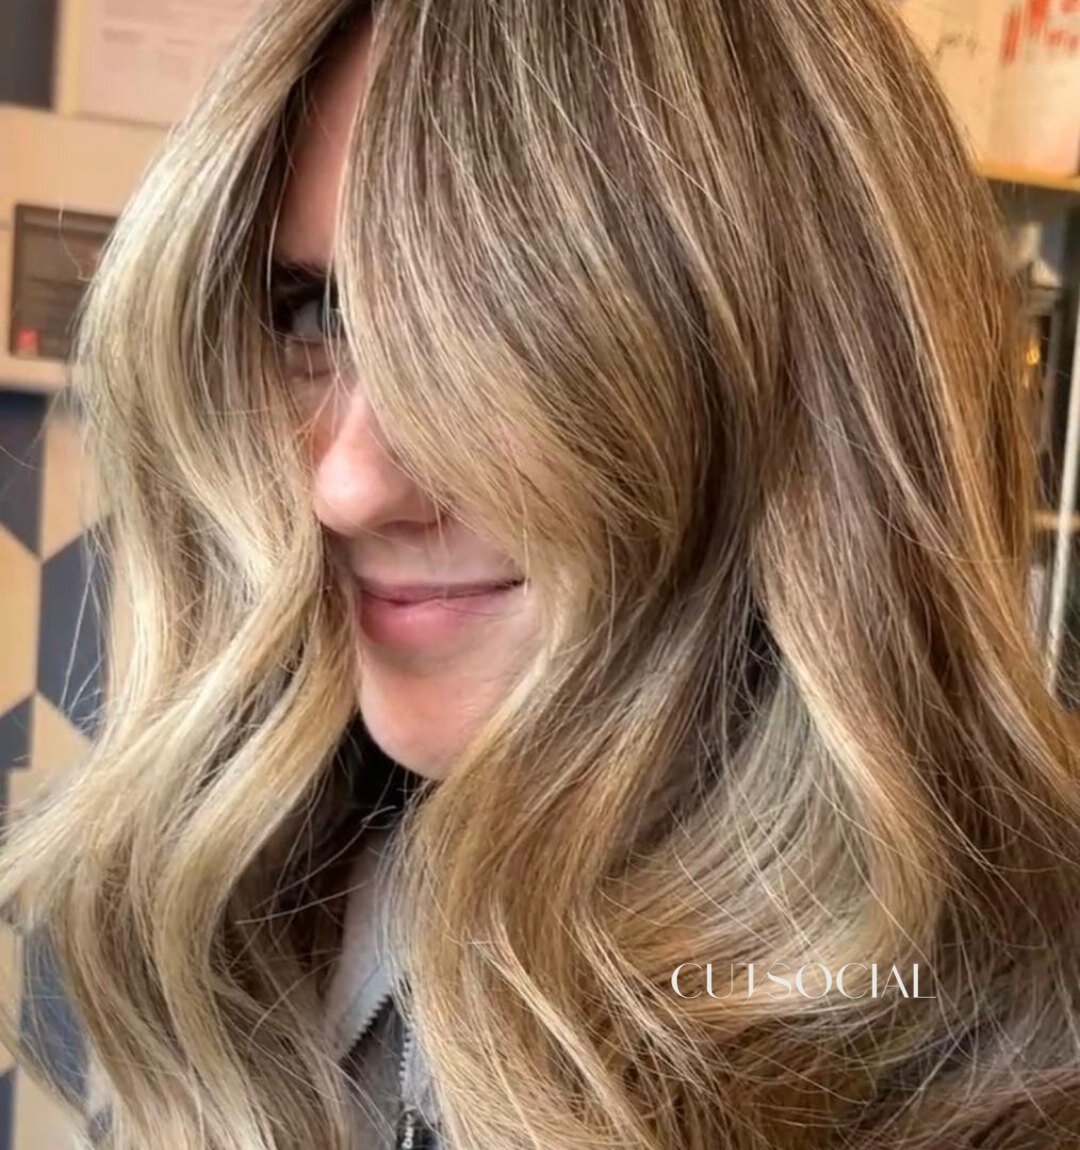 By @__katrinakelly_ 💕

Are you going lighter for summer? 🫶 Book through the link in our bio to start our summer hair journey - now's the time! 

#cutsocial #dublinsalon #behindthechair #dublinhairdresser #hairbrained